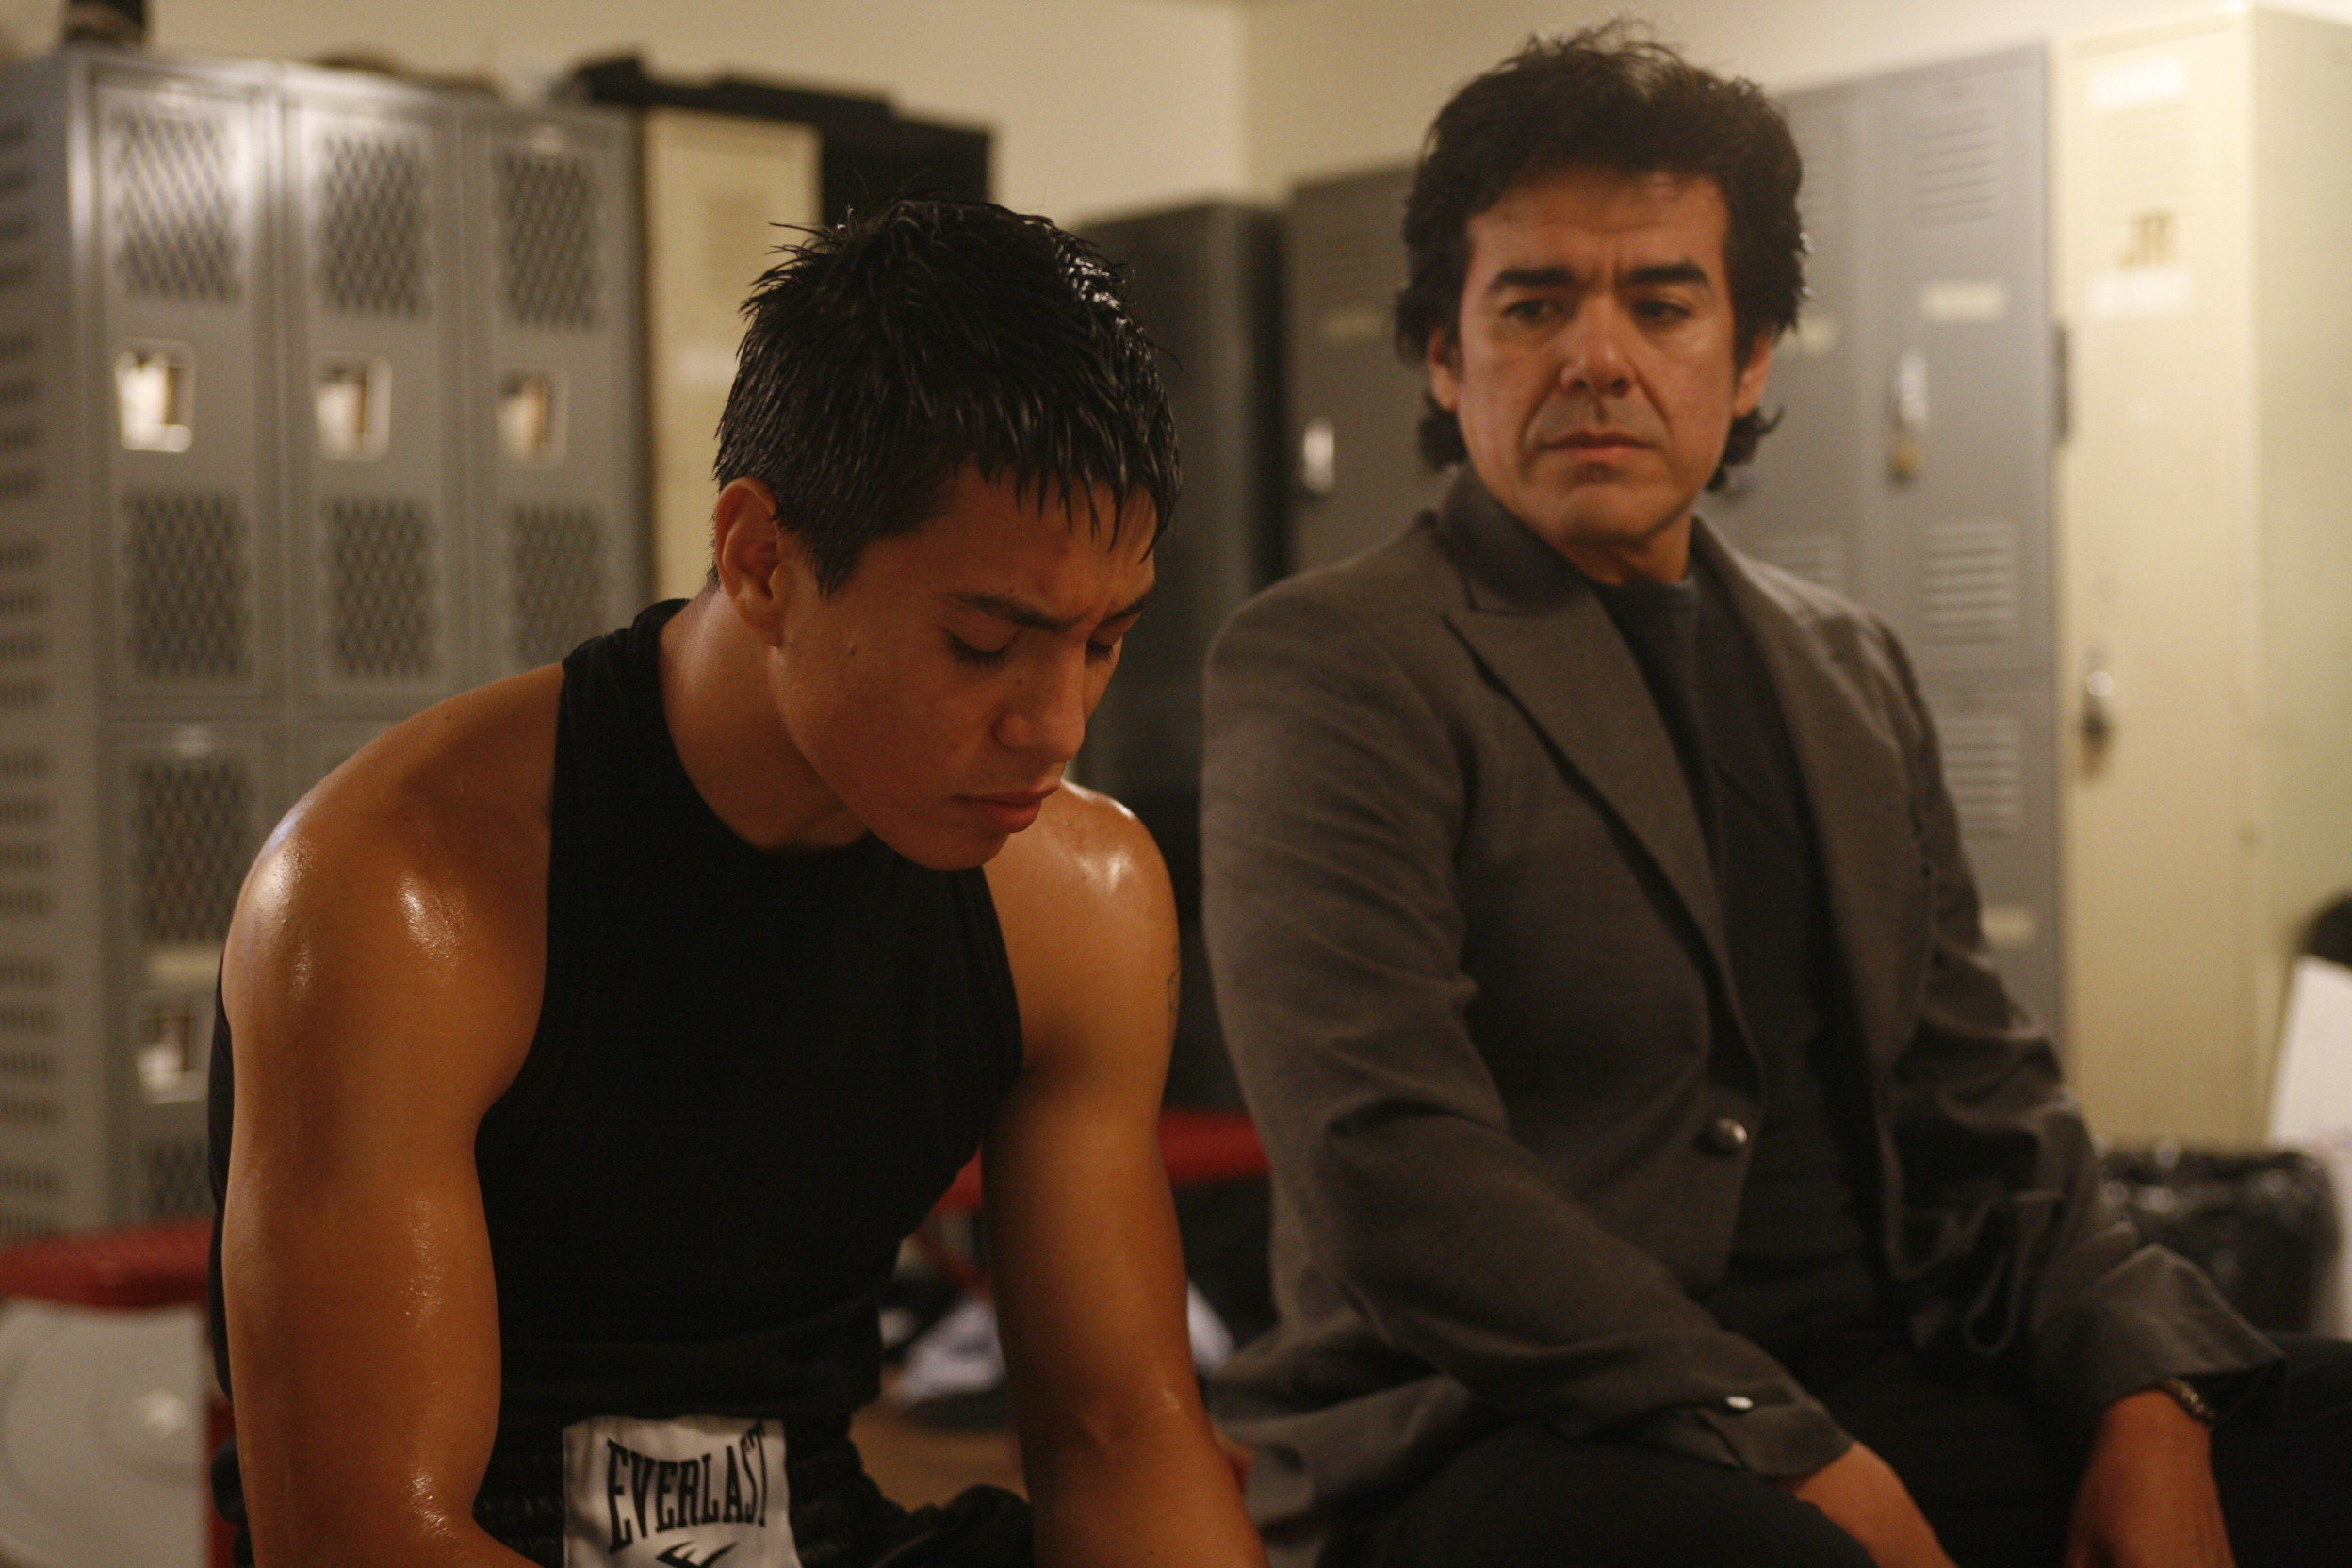 Jesse (Stewart Flores)and Geronimo Guerrero (Jose Yenque) after the fight.